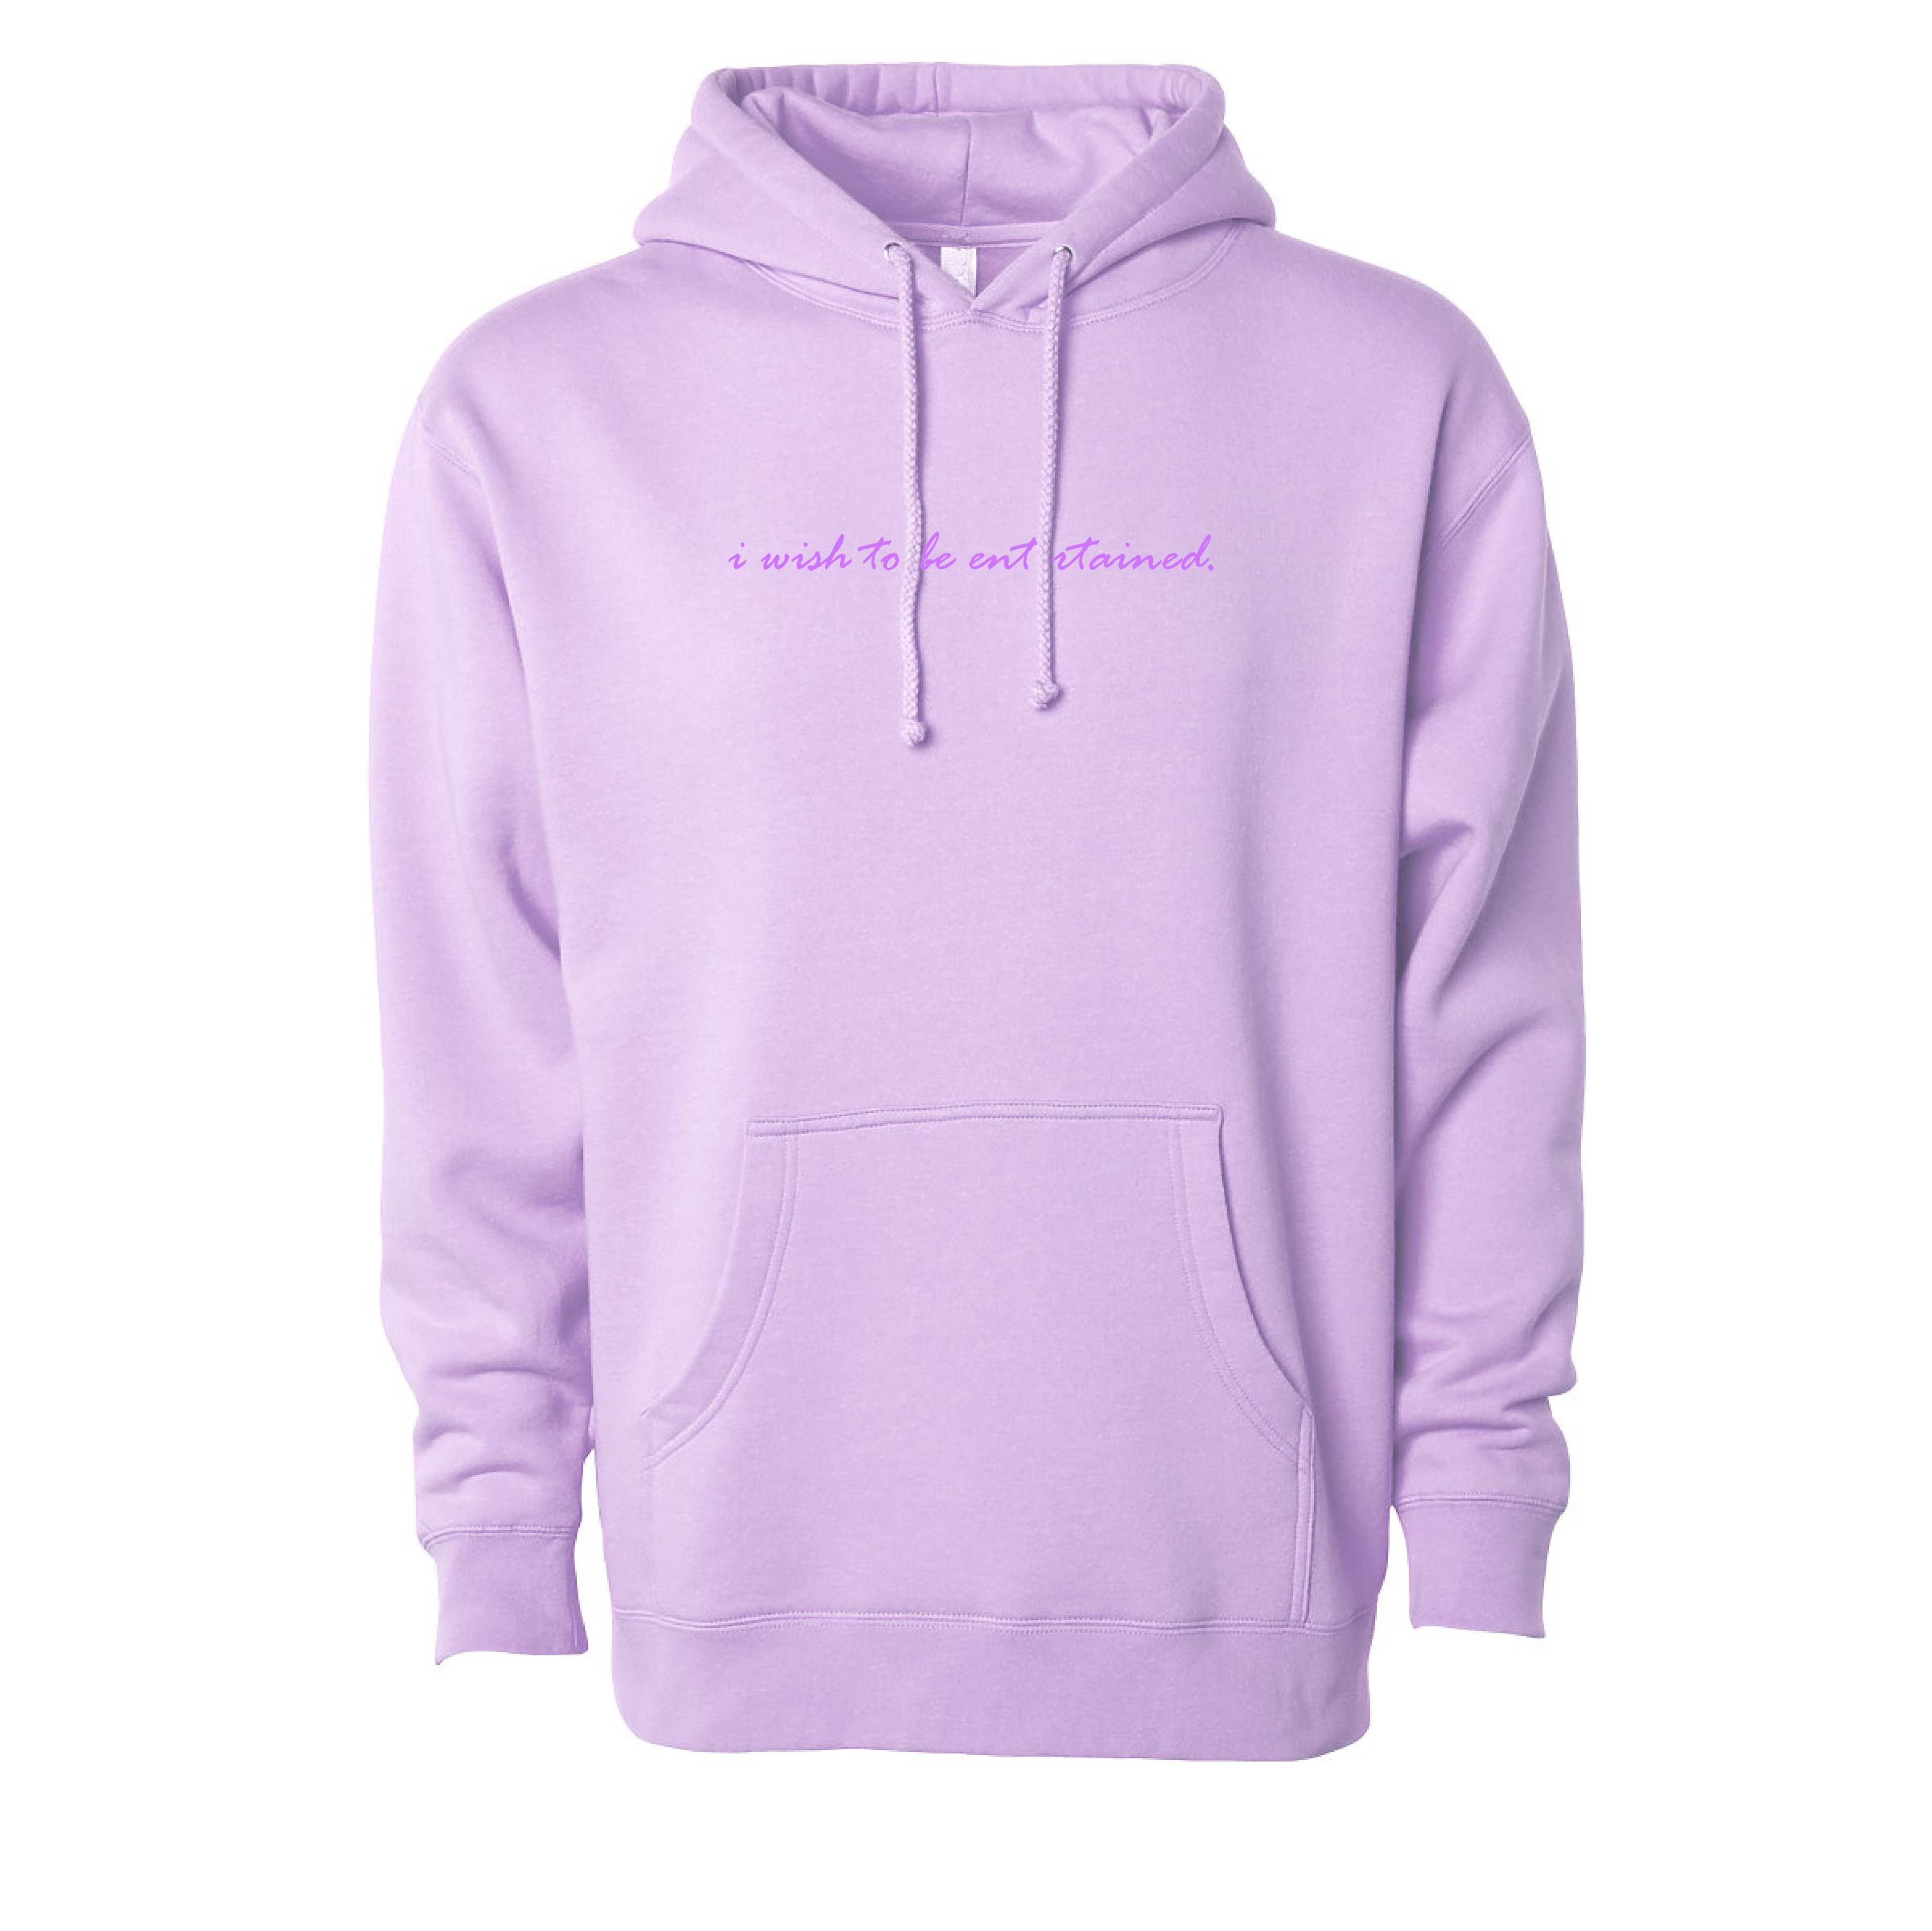 "I Wish To Be Entertained" Hoodie